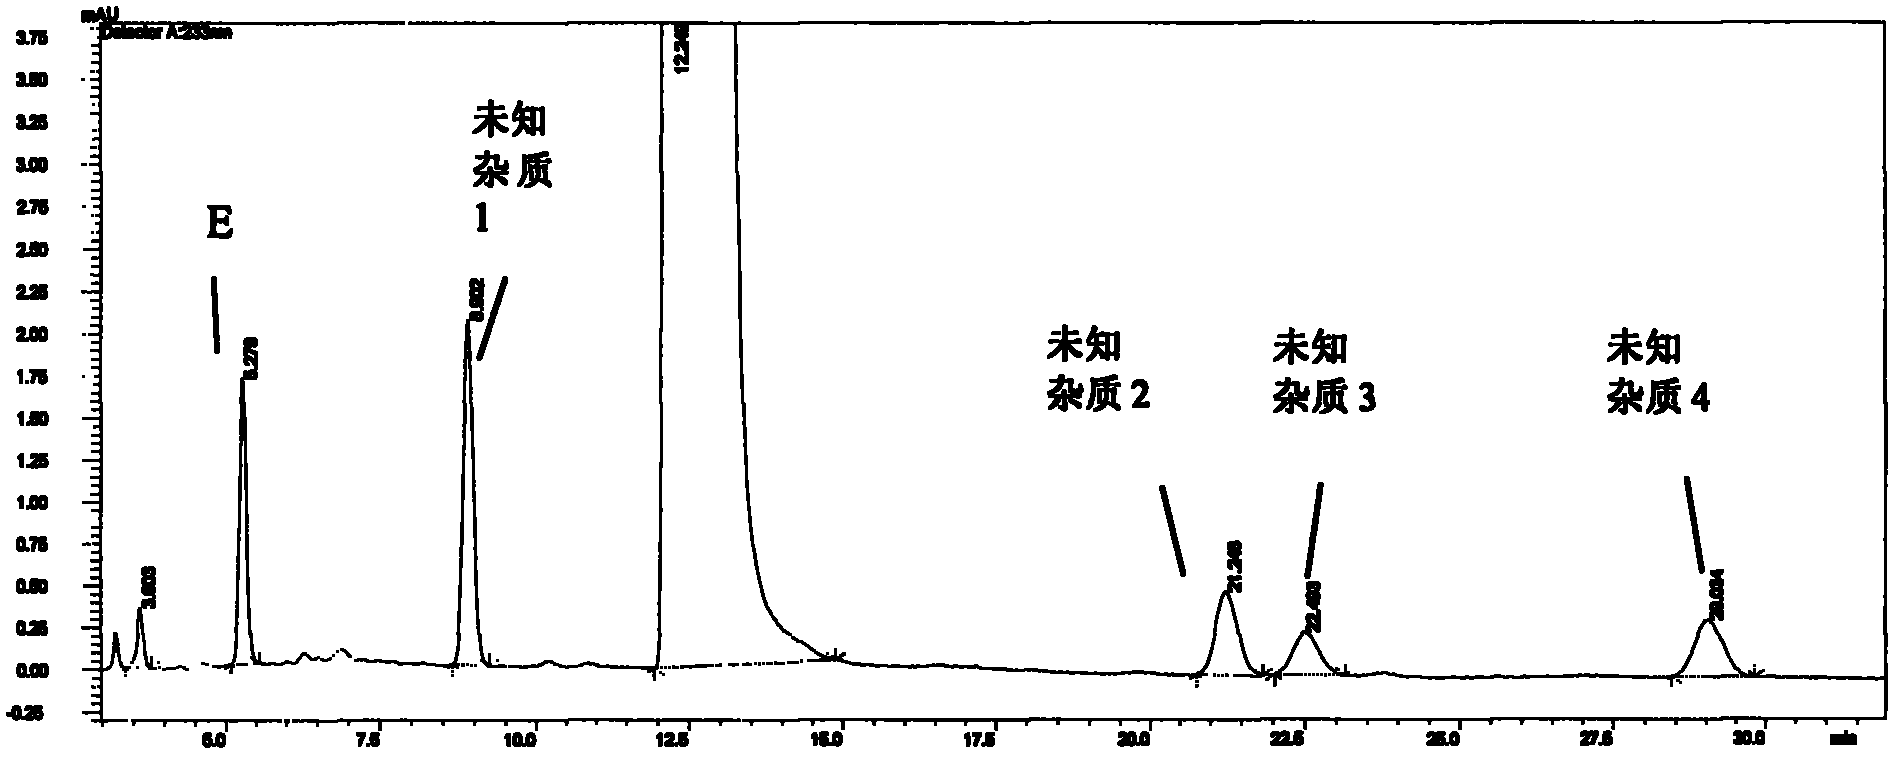 High performance liquid chromatographic analysis method of bendamustine hydrochloride and its related substances